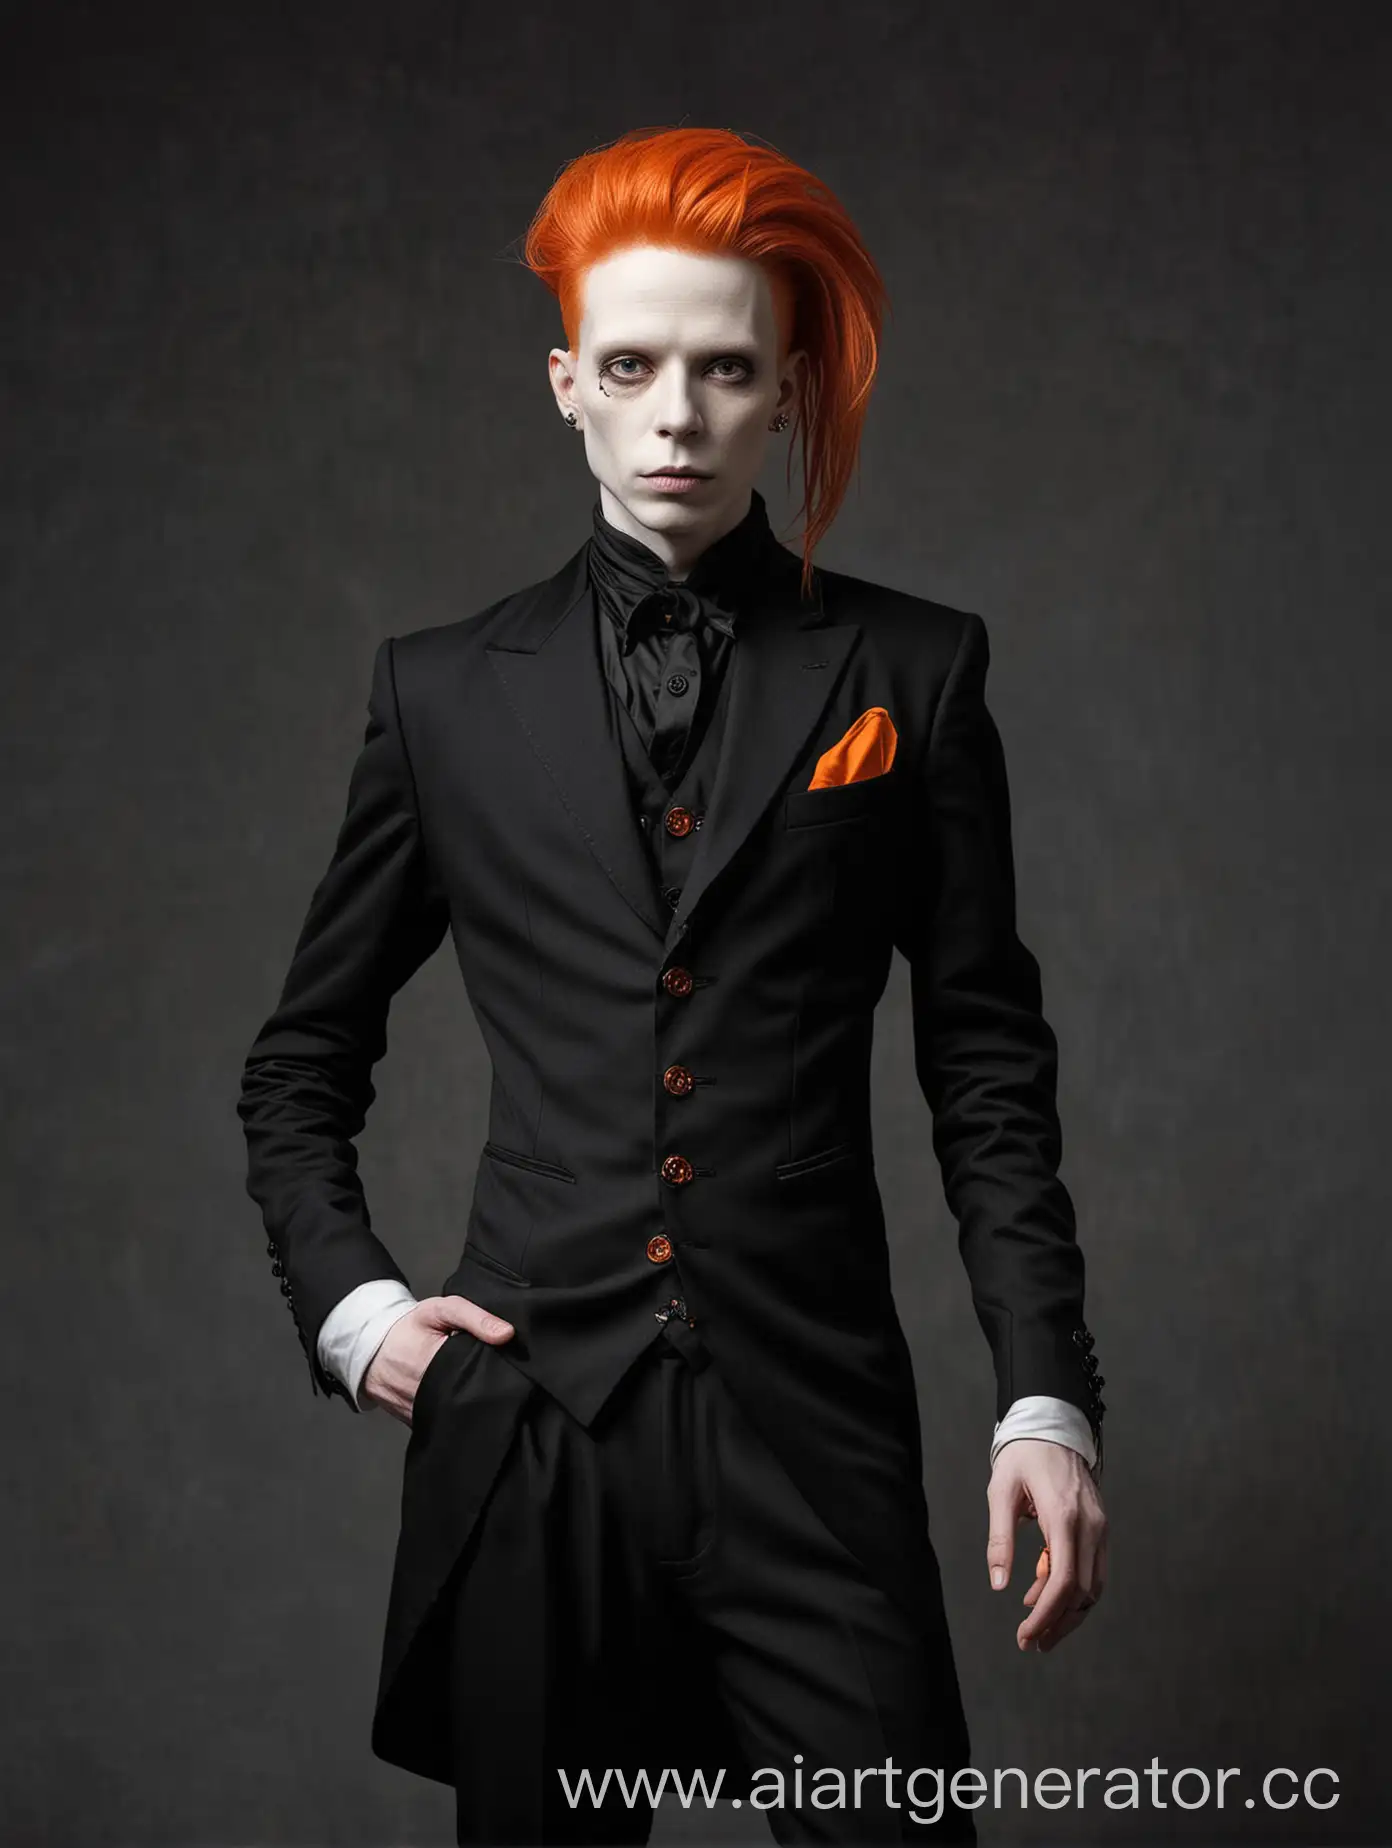 Charismatic-Pale-Performer-in-Extravagant-Black-Suit-with-Striking-Red-Hair